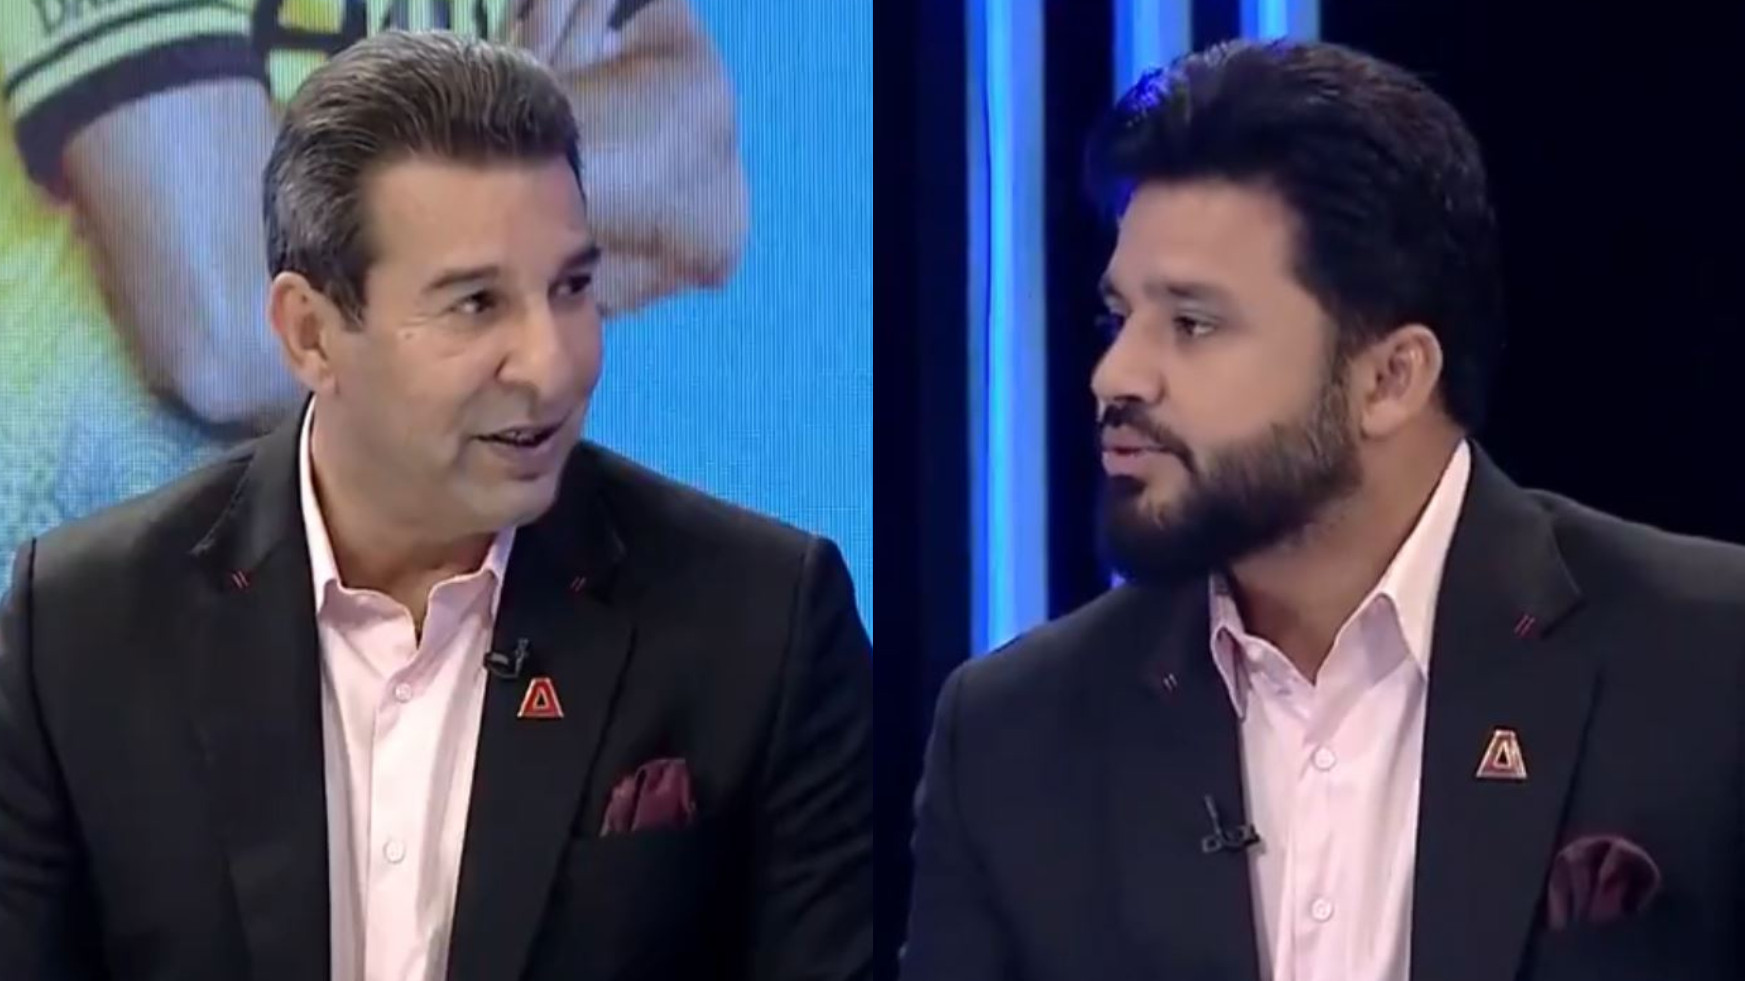 WATCH- “Kaun the yeh genius?”- Wasim Akram asks Azhar Ali after he says a PCB chairman wanted T20 stars in Test team